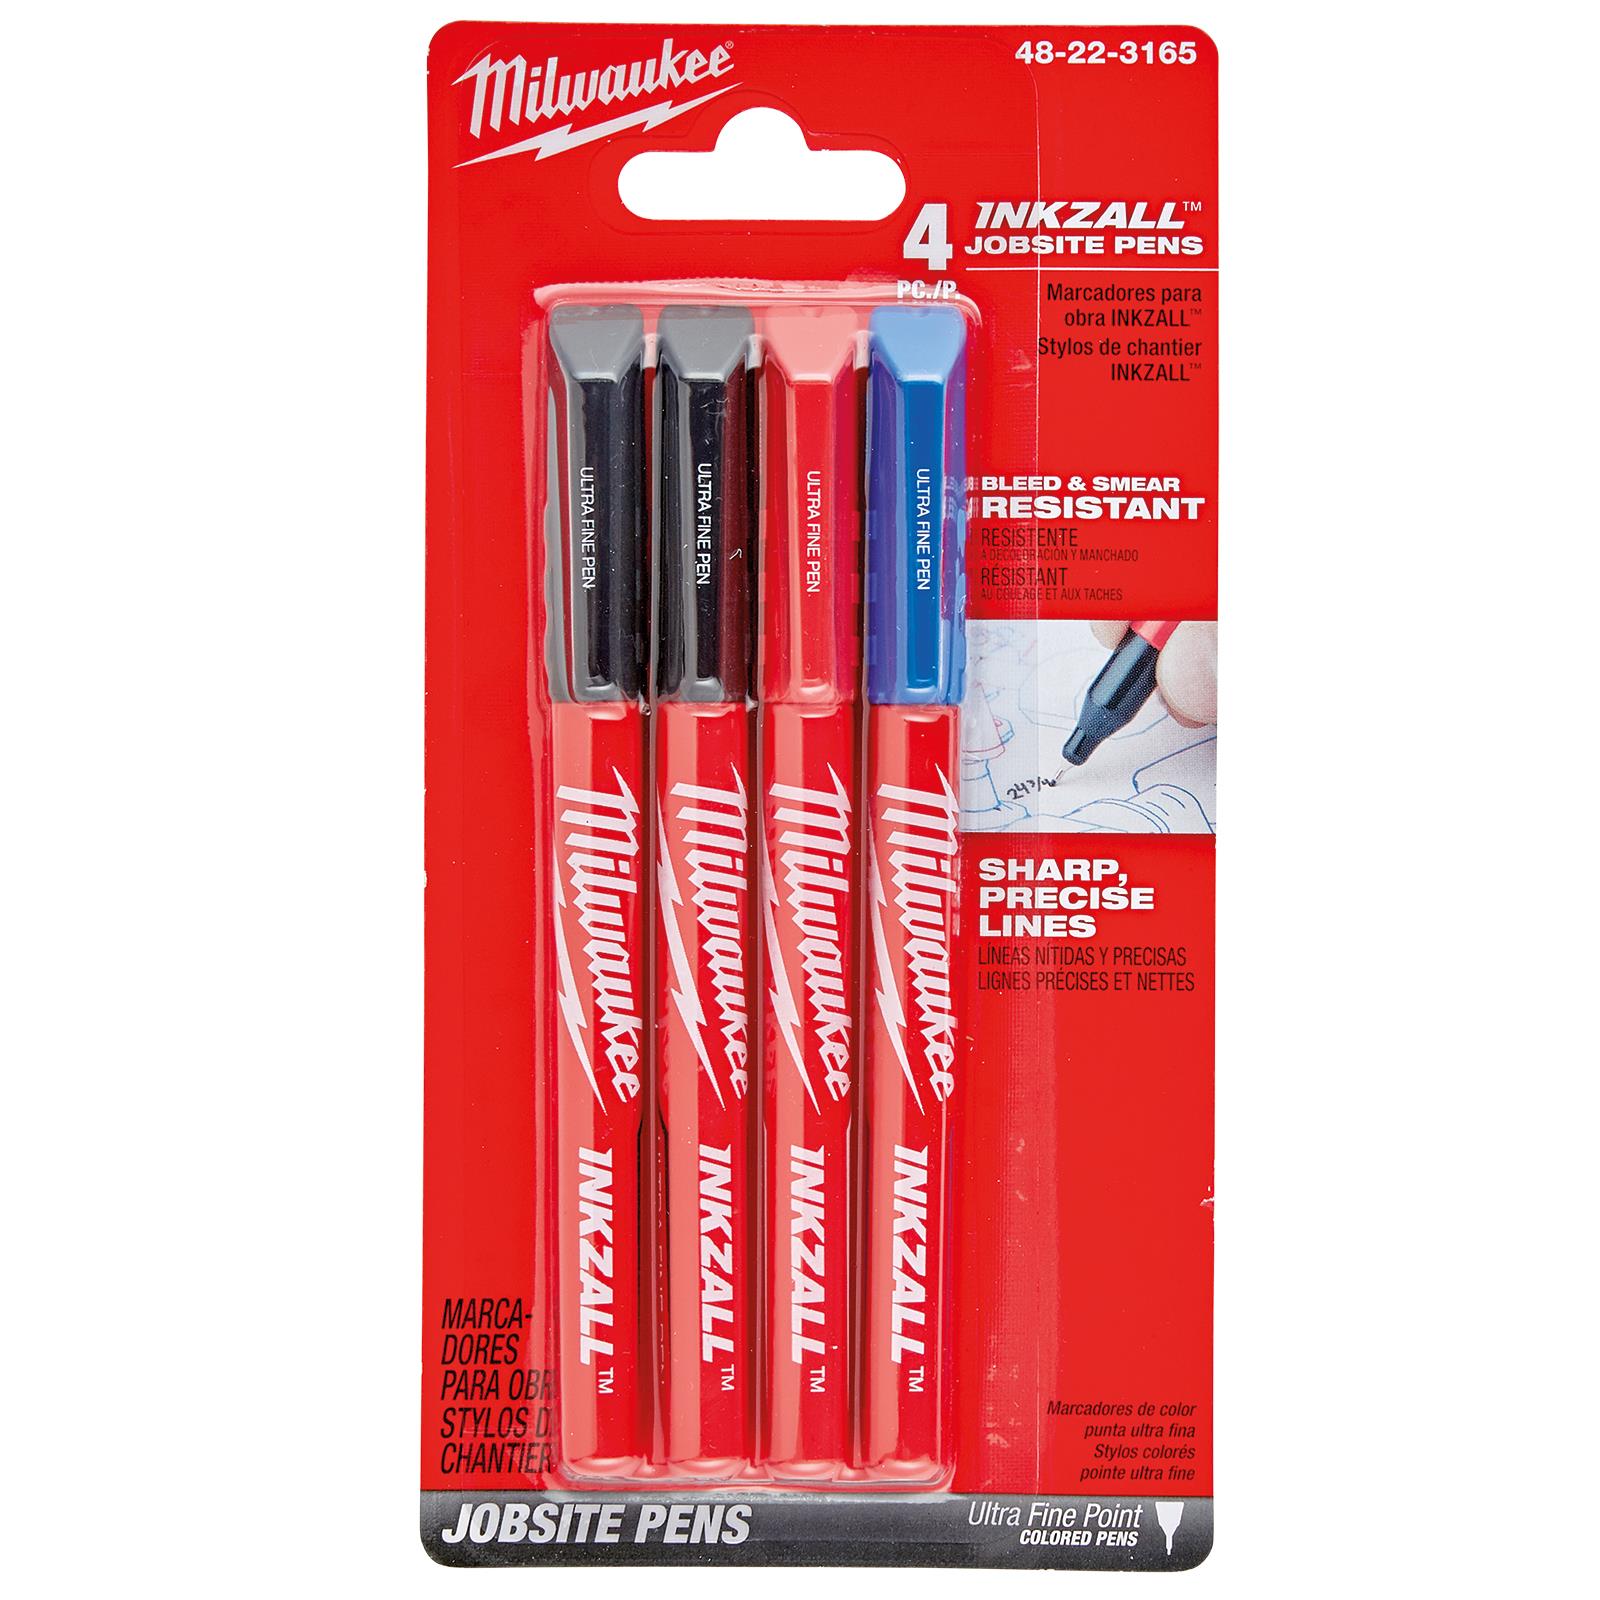 INKZALL Marking Pens and Jobsite Colored Markers